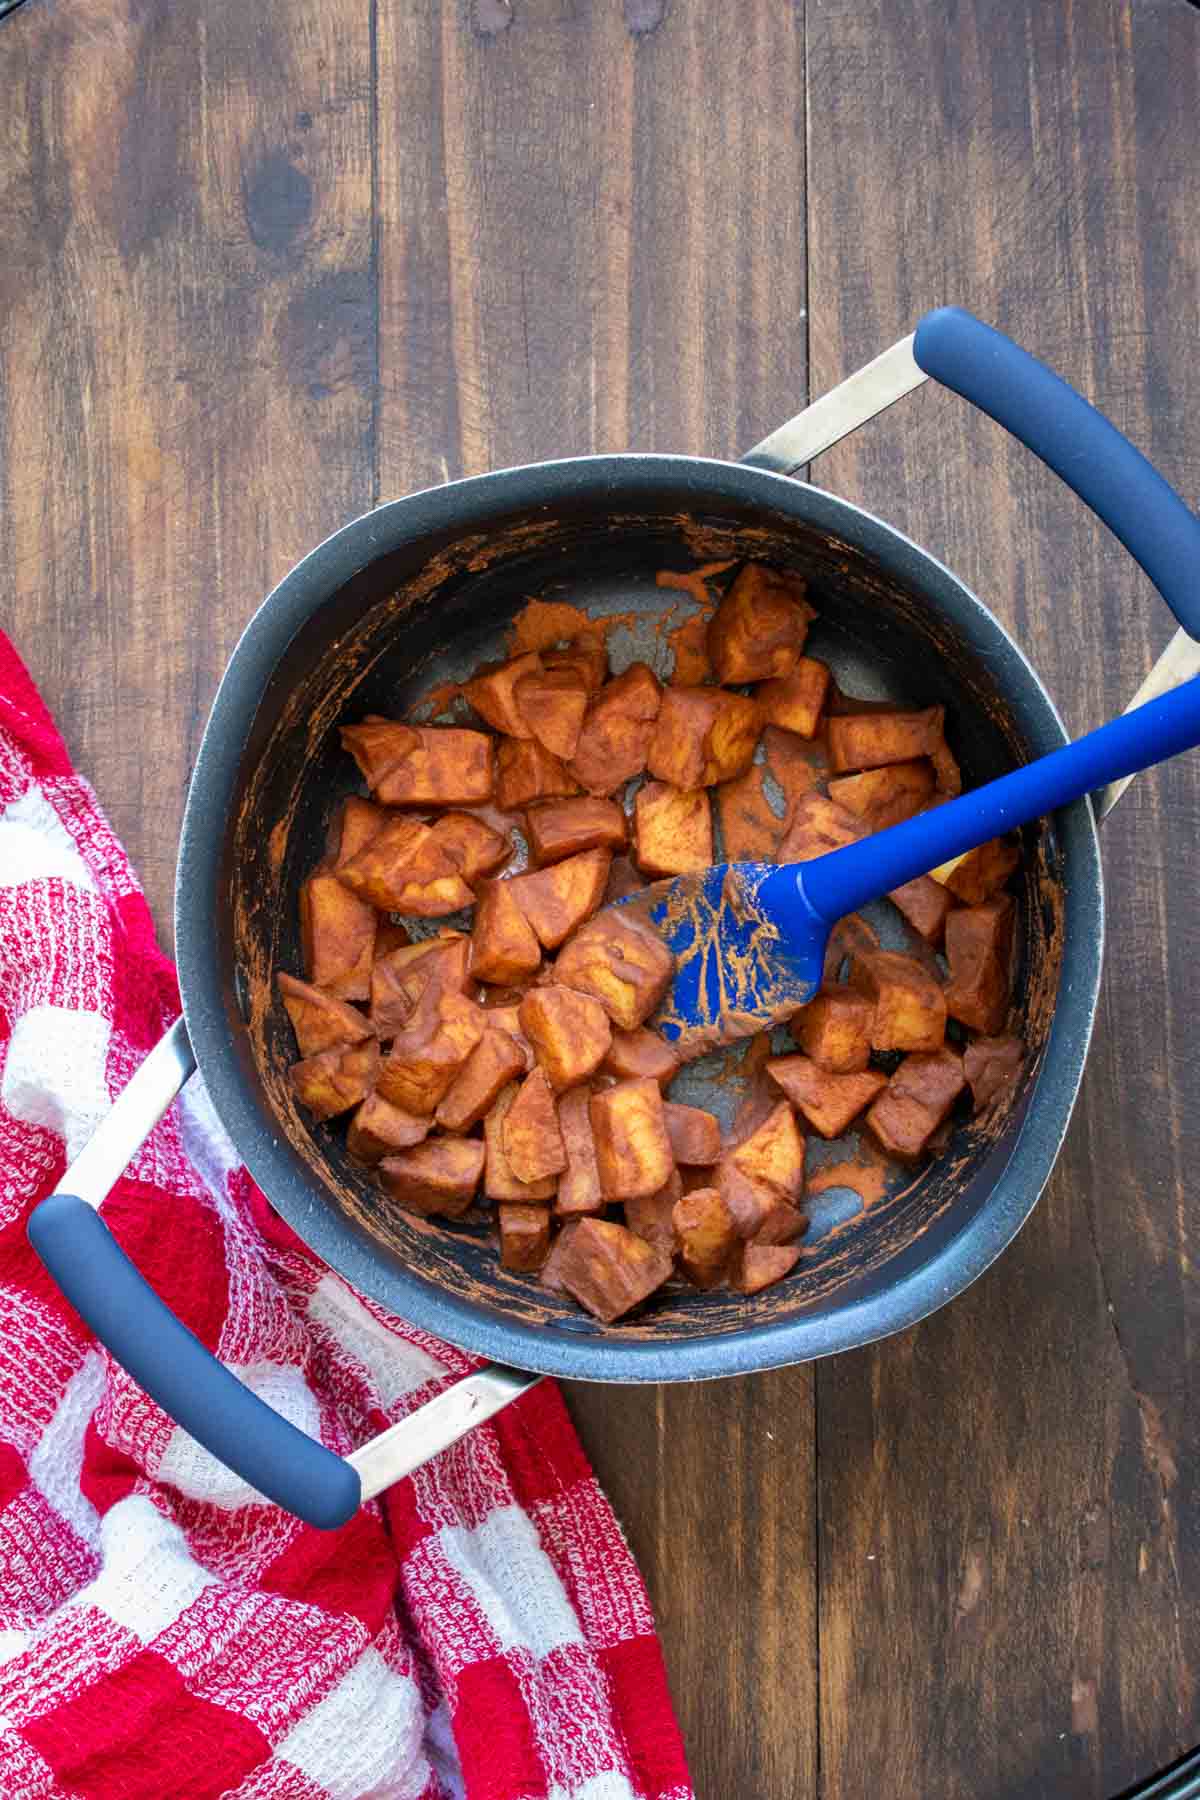 Blue spatula mixing apples and cinnamon in a pot